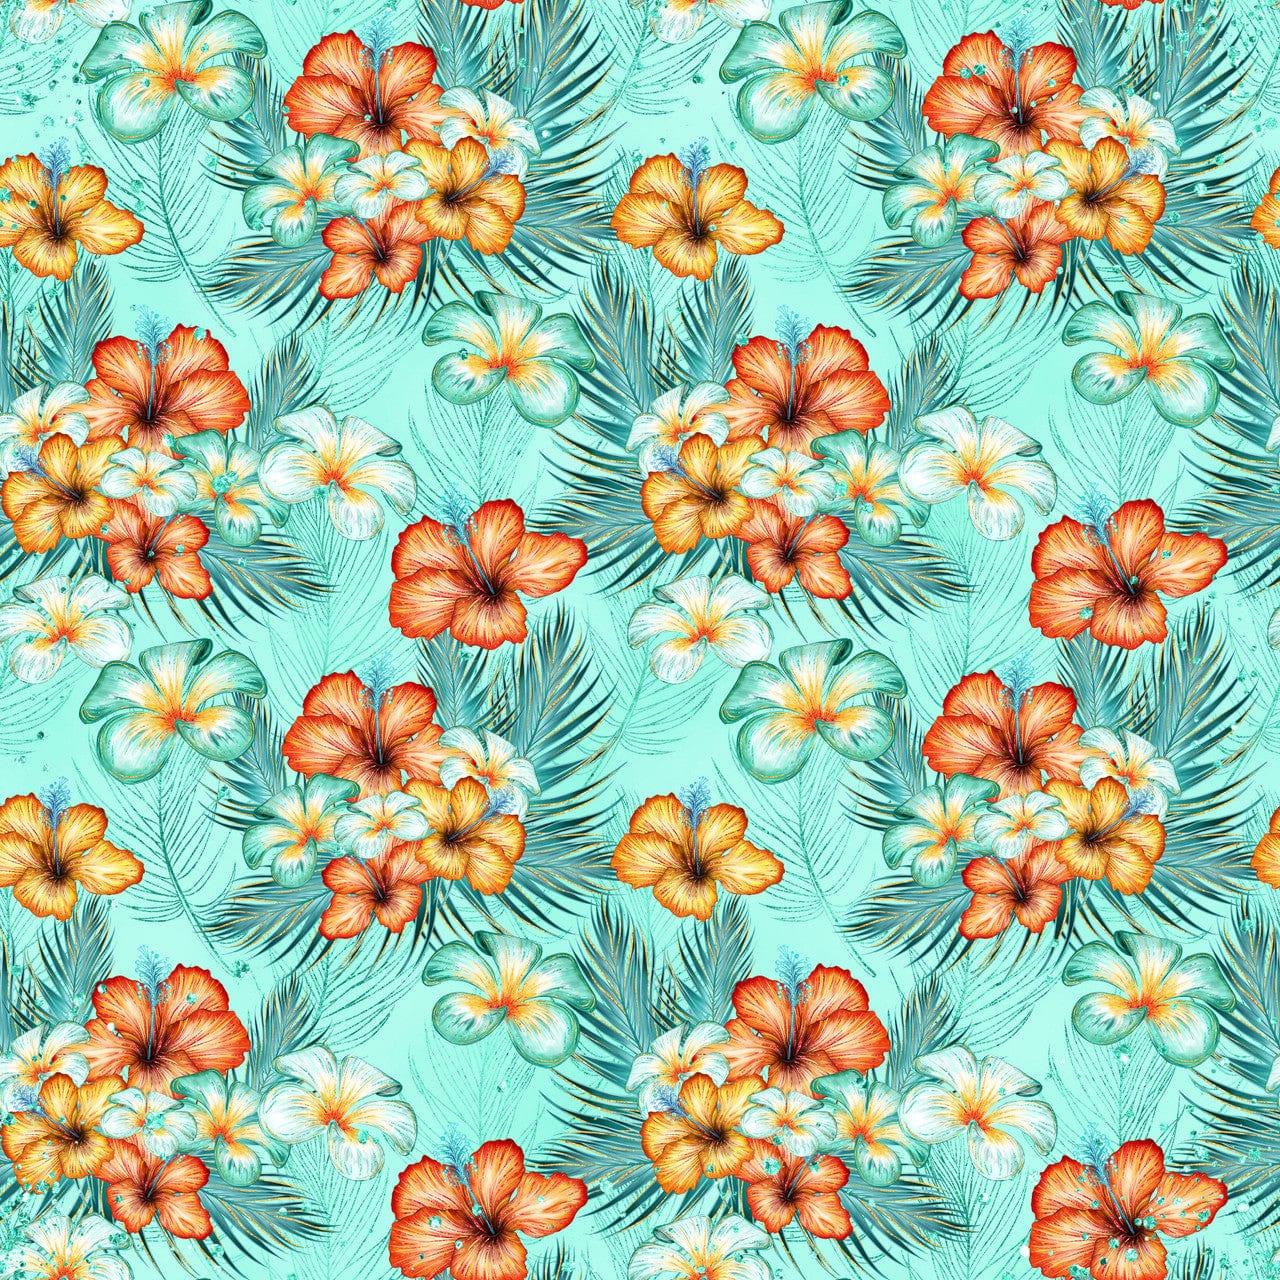 Phantasia Design's Tropics Collection Coconuts 12 x 12 Double-Sided Scrapbook Paper by SSC Designs - Scrapbook Supply Companies